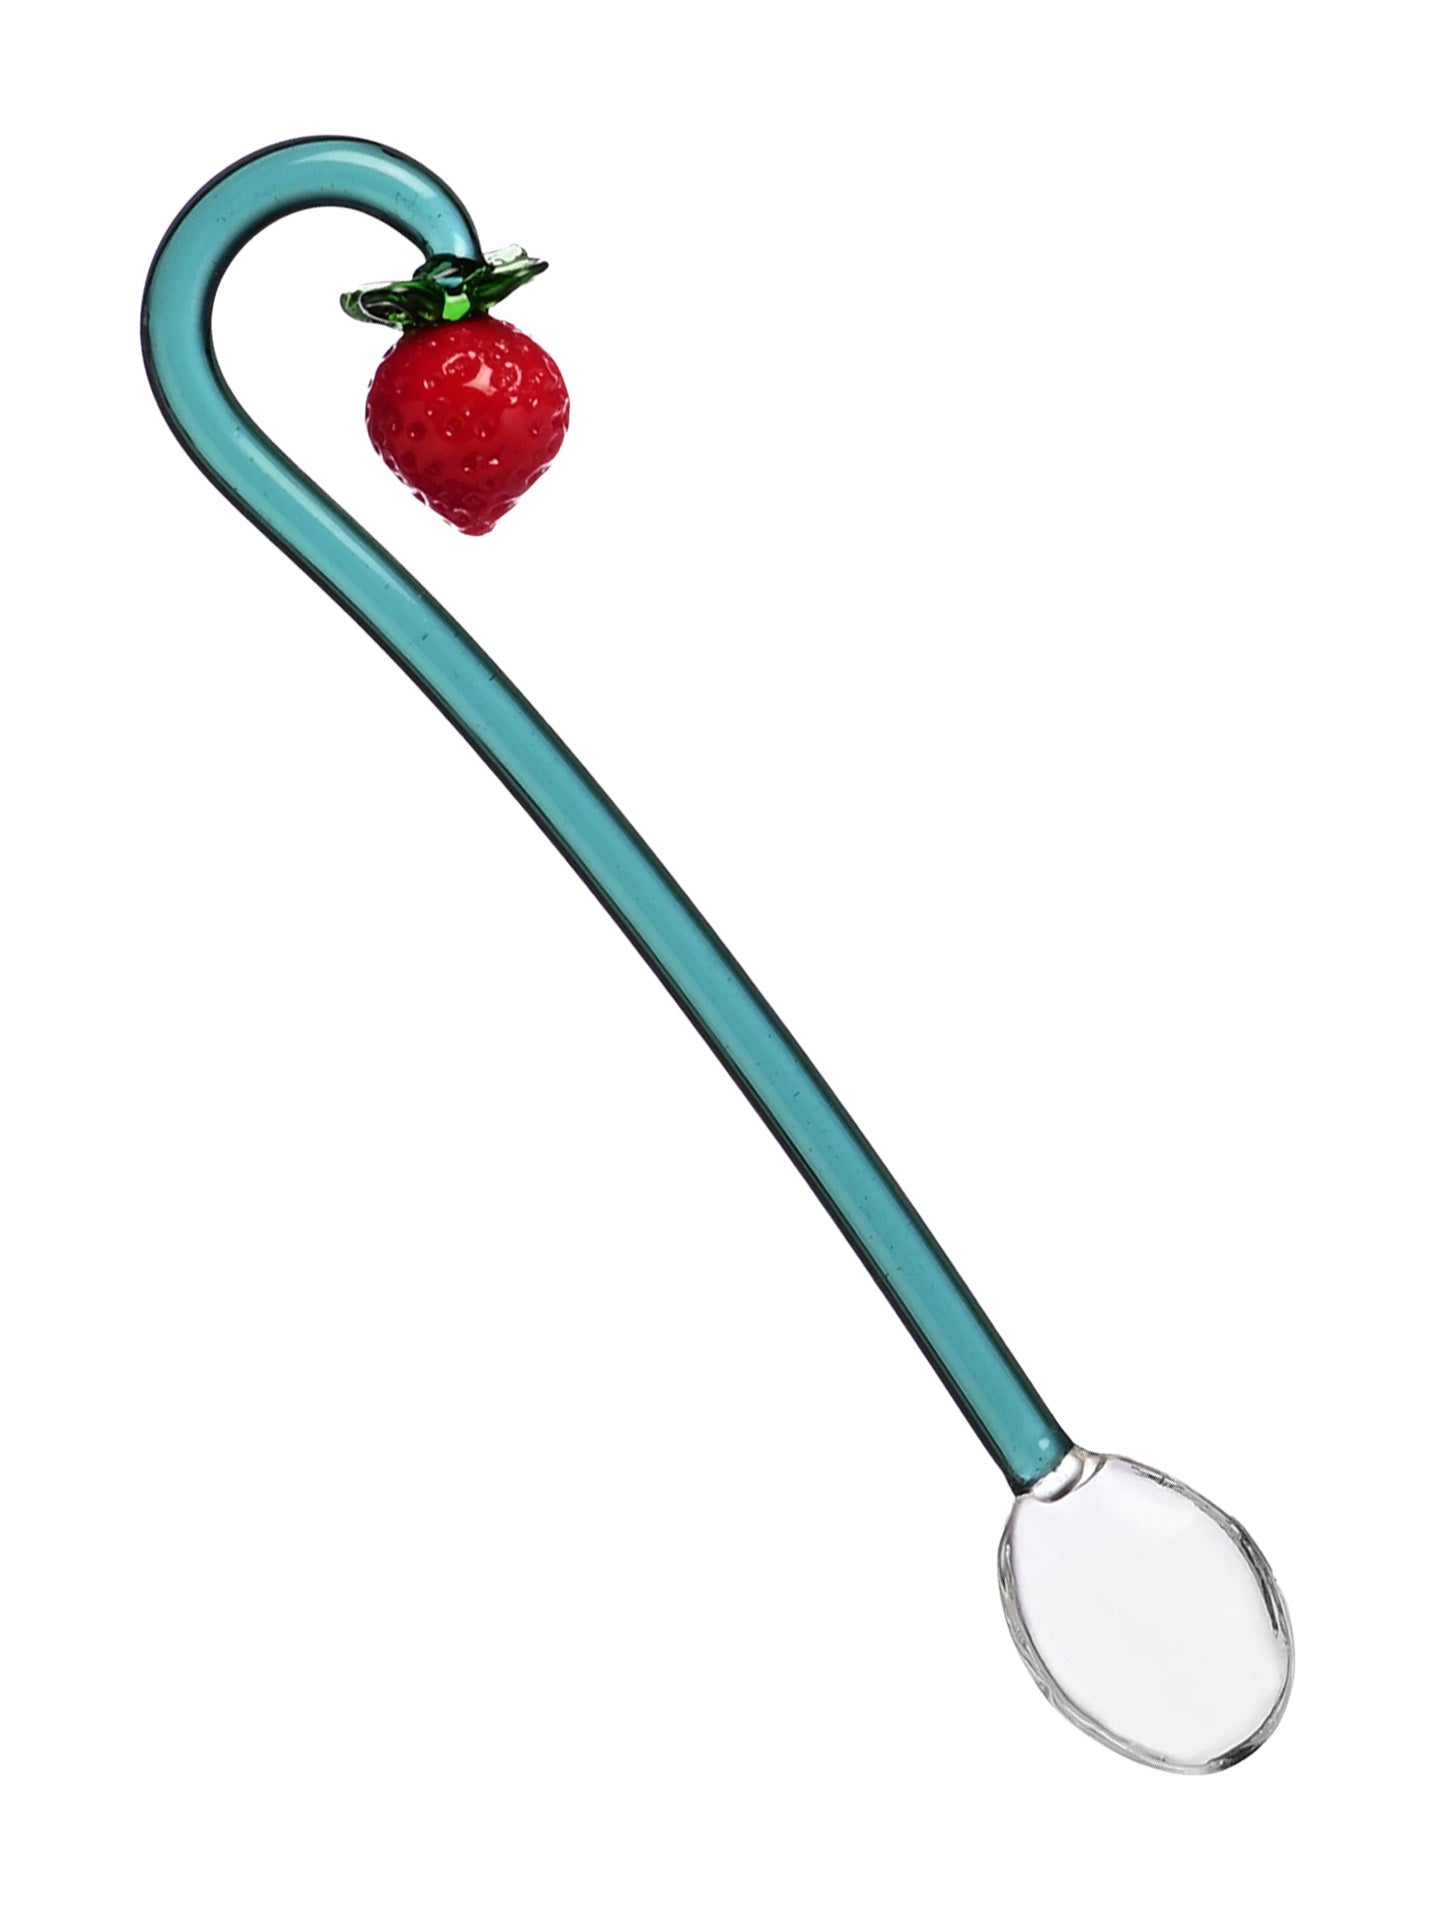 Glass Spoon Strawberry, Fruits & Flower Collection